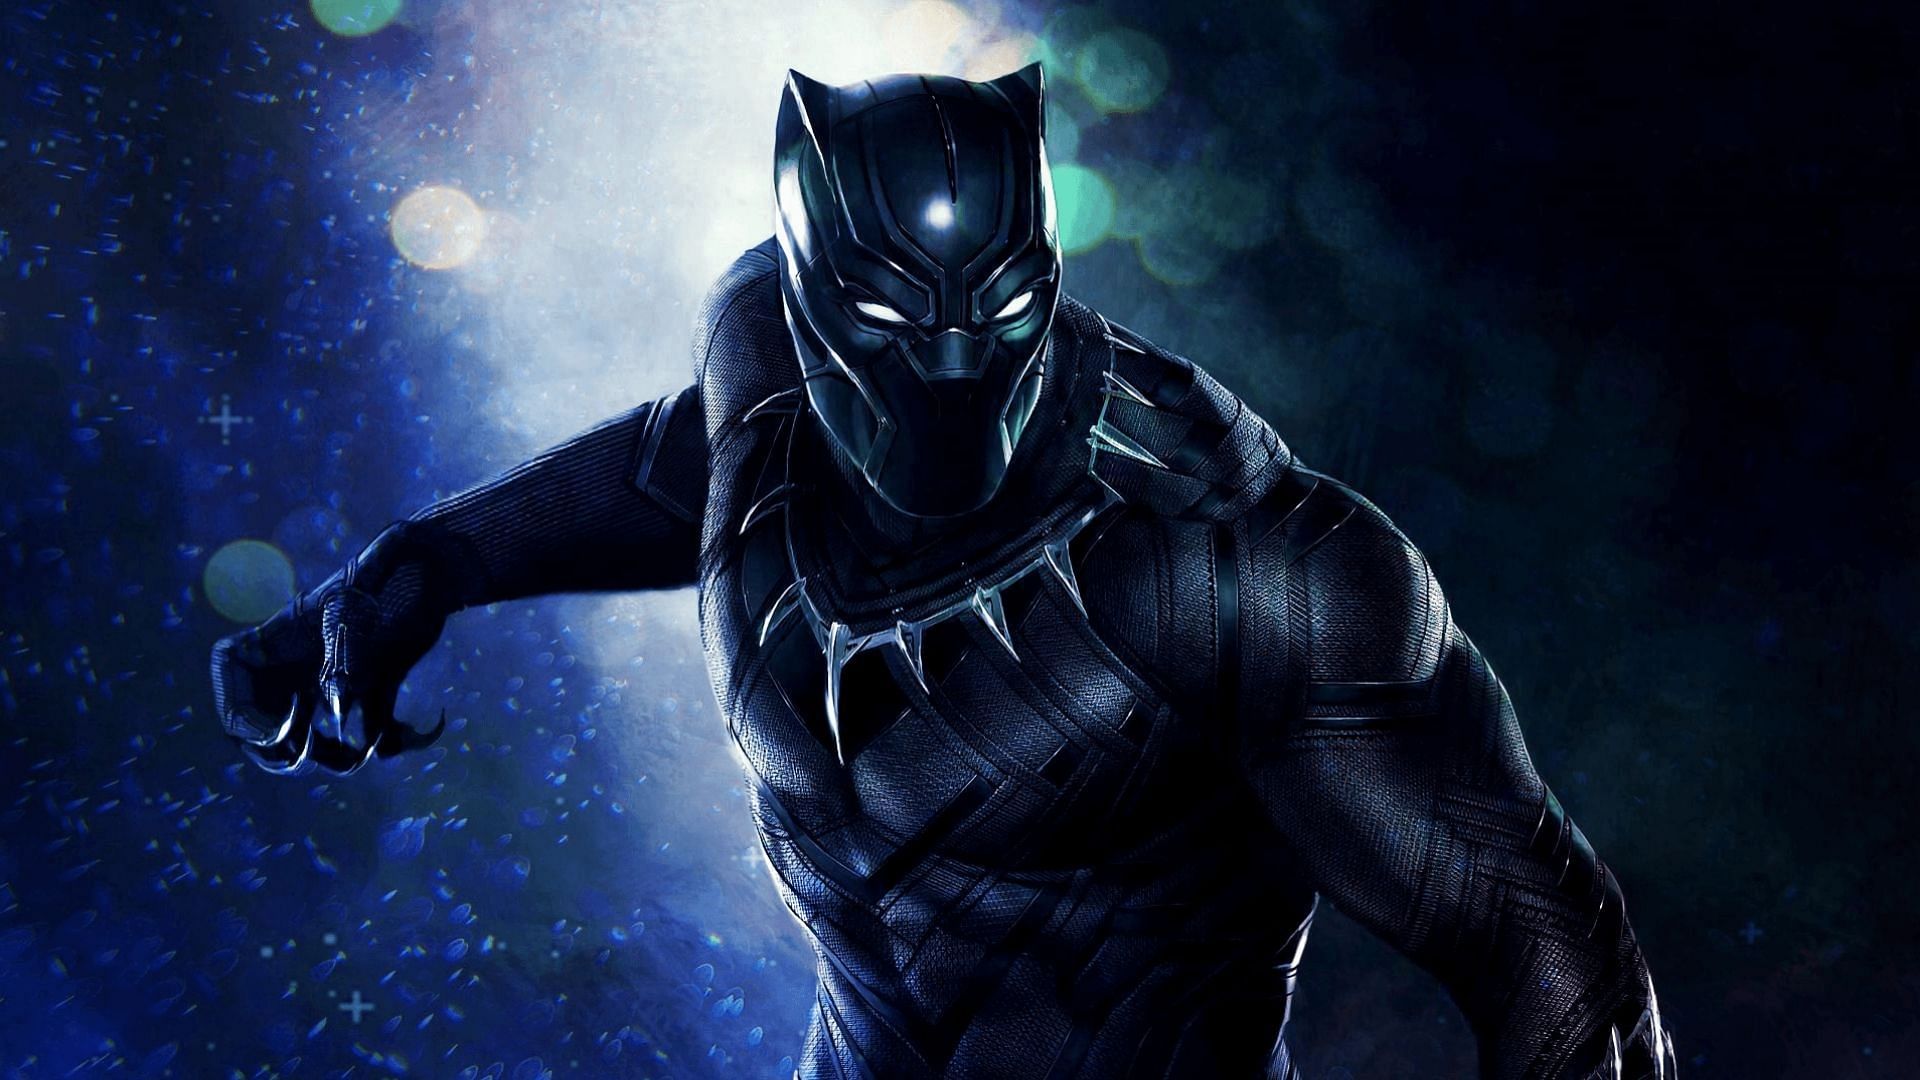 Black Panther movie could be included in future phases of the Marvel. (Image via Marvel)